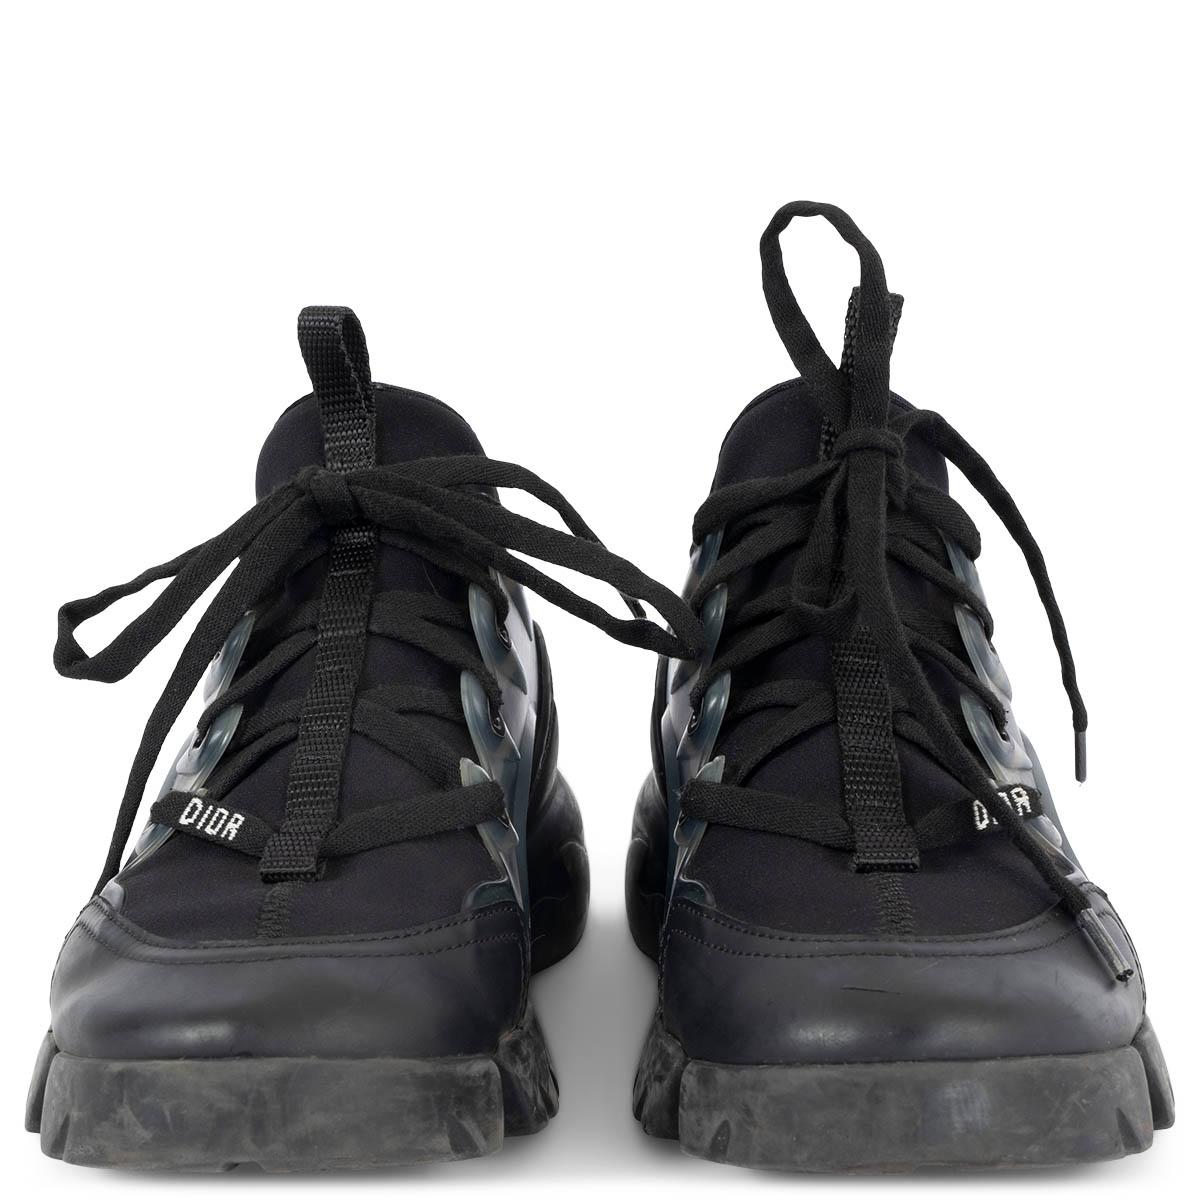 100% authentic Christian Dior D-Connnect sneakers in black stretchy technical fabric. Features a thick rubber sole, transparent rubber inserts and nylon tabs on front and back. Have been worn and show some wear to the rubber sole. Overall in very